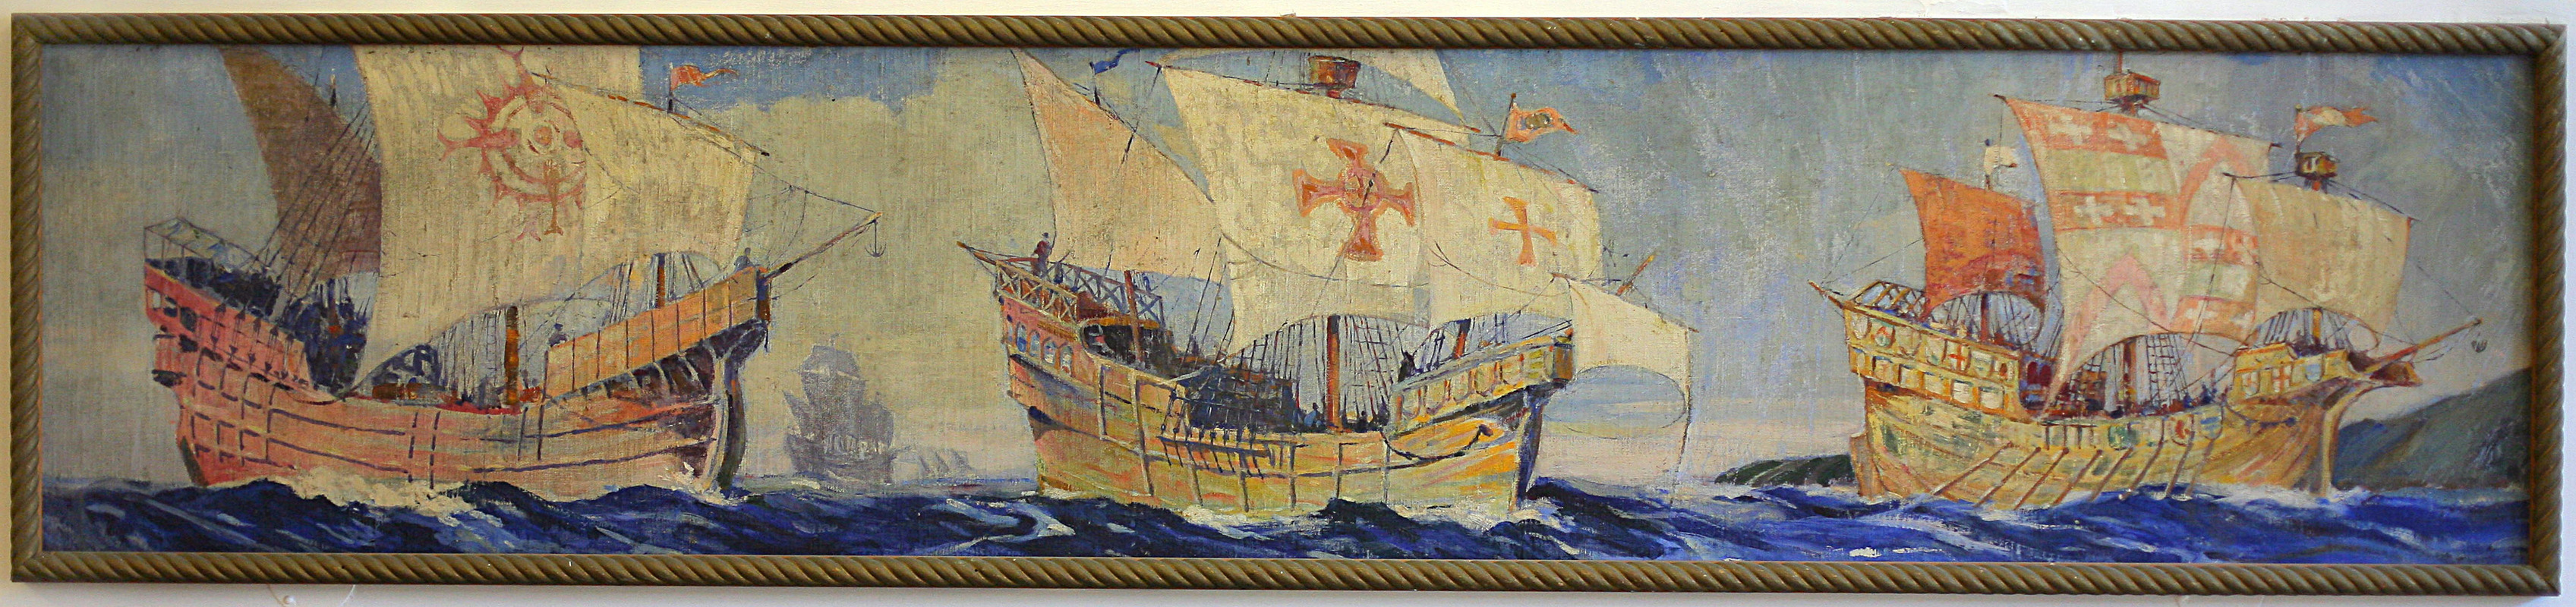 Ships Through the Ages: Great Carrack, Spanish Caravel, Galleass